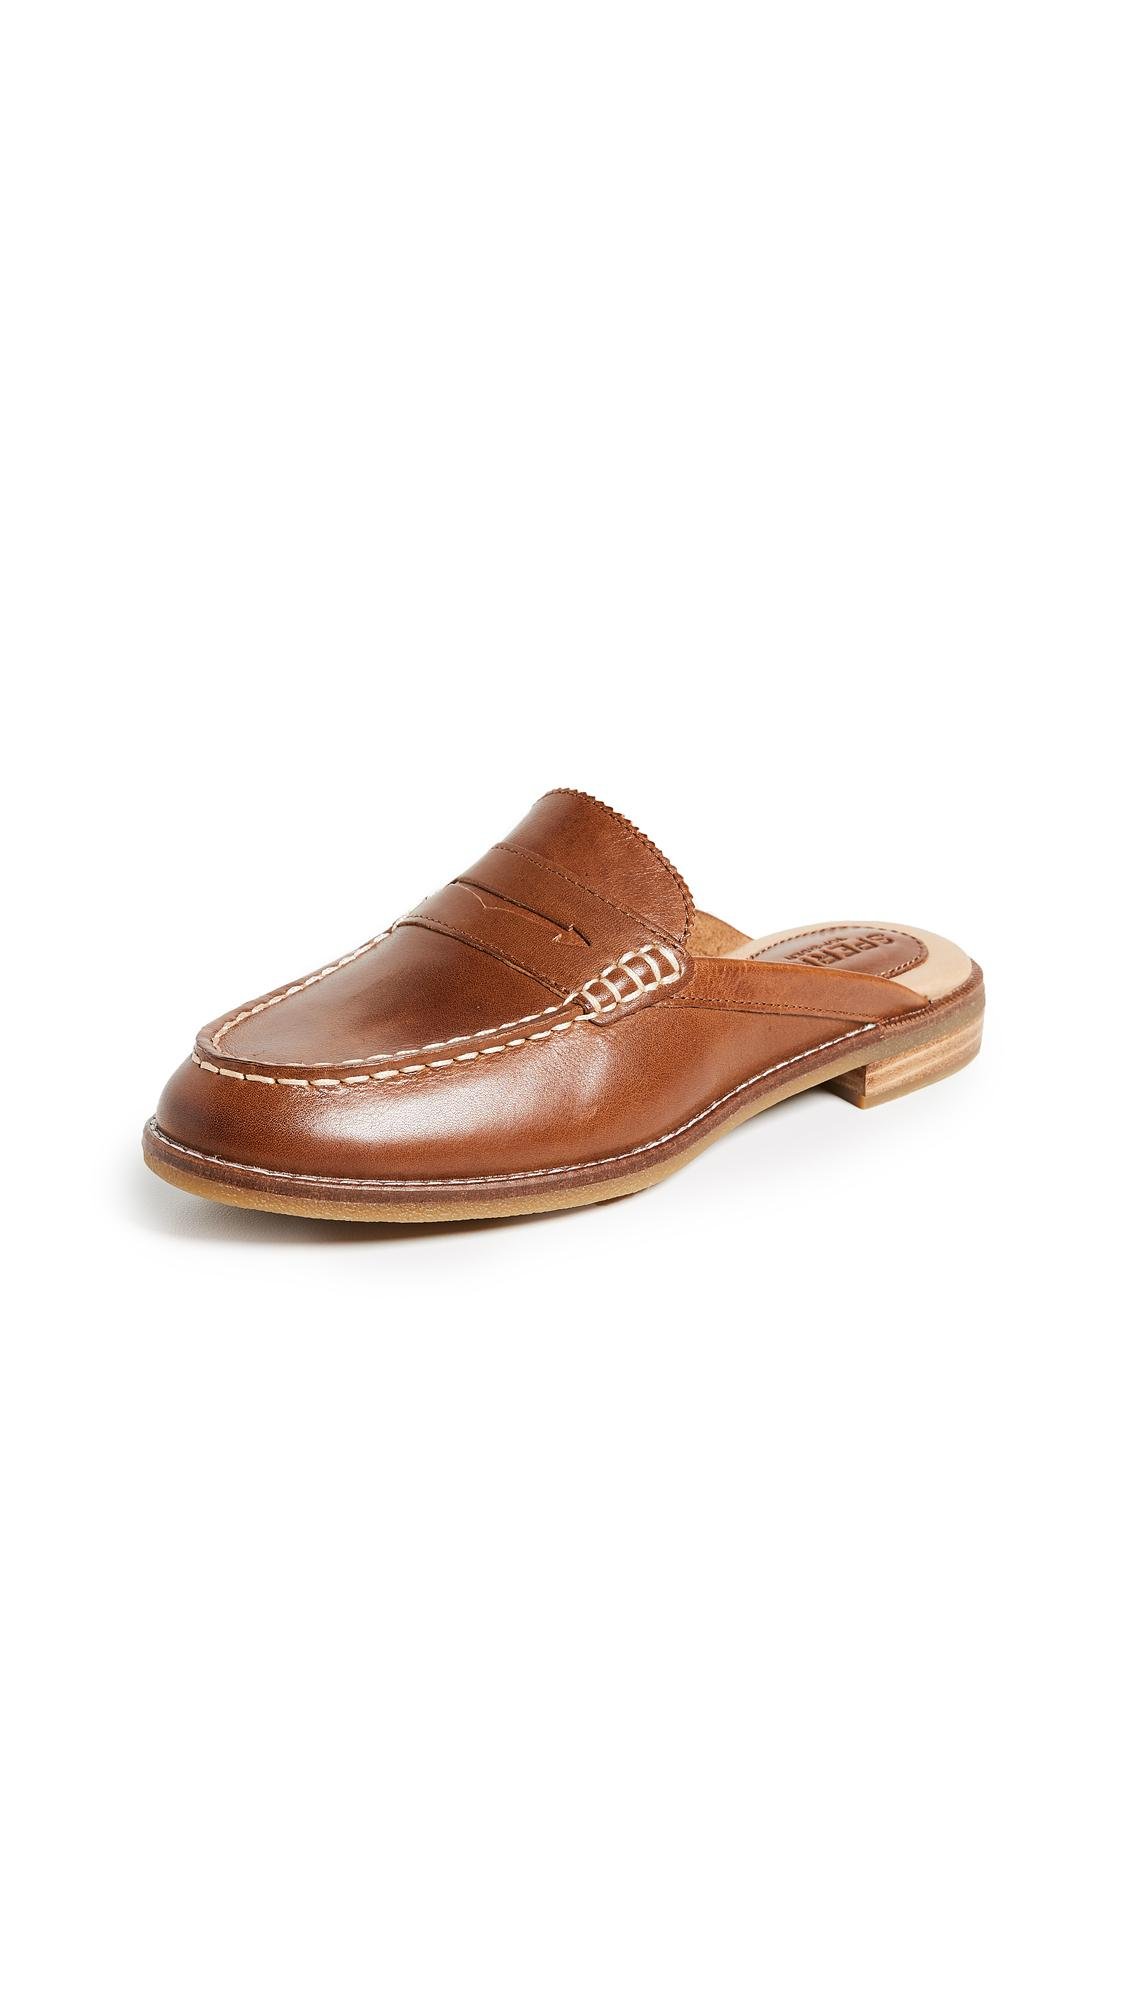 Details about   Sperry Seaport Mule Tan Size 7.5 